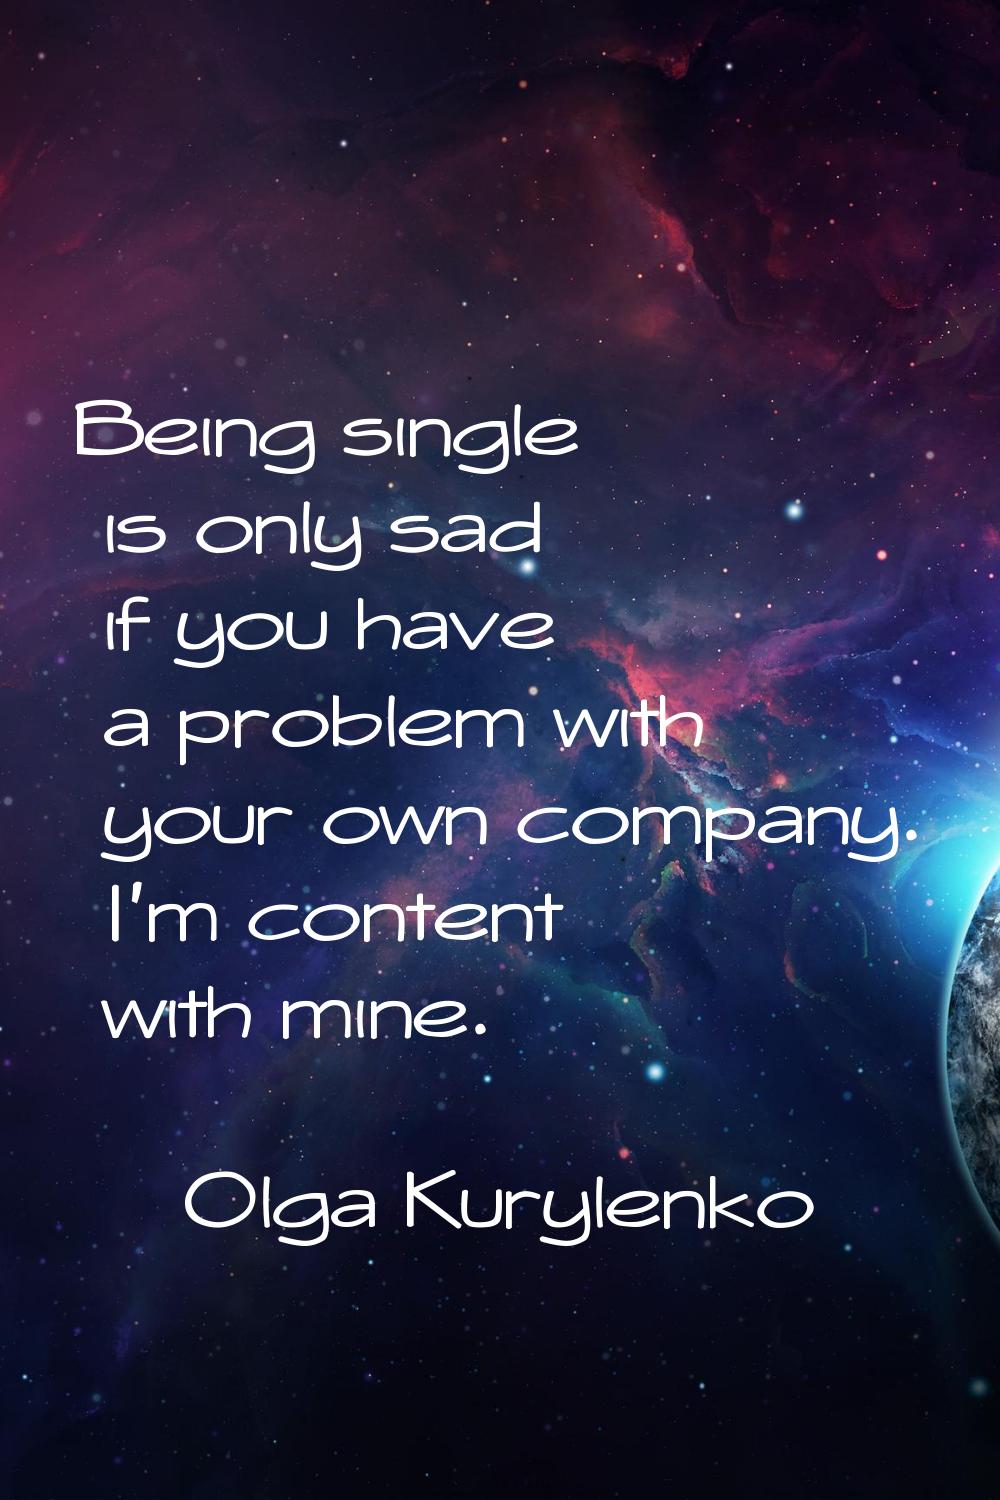 Being single is only sad if you have a problem with your own company. I'm content with mine.